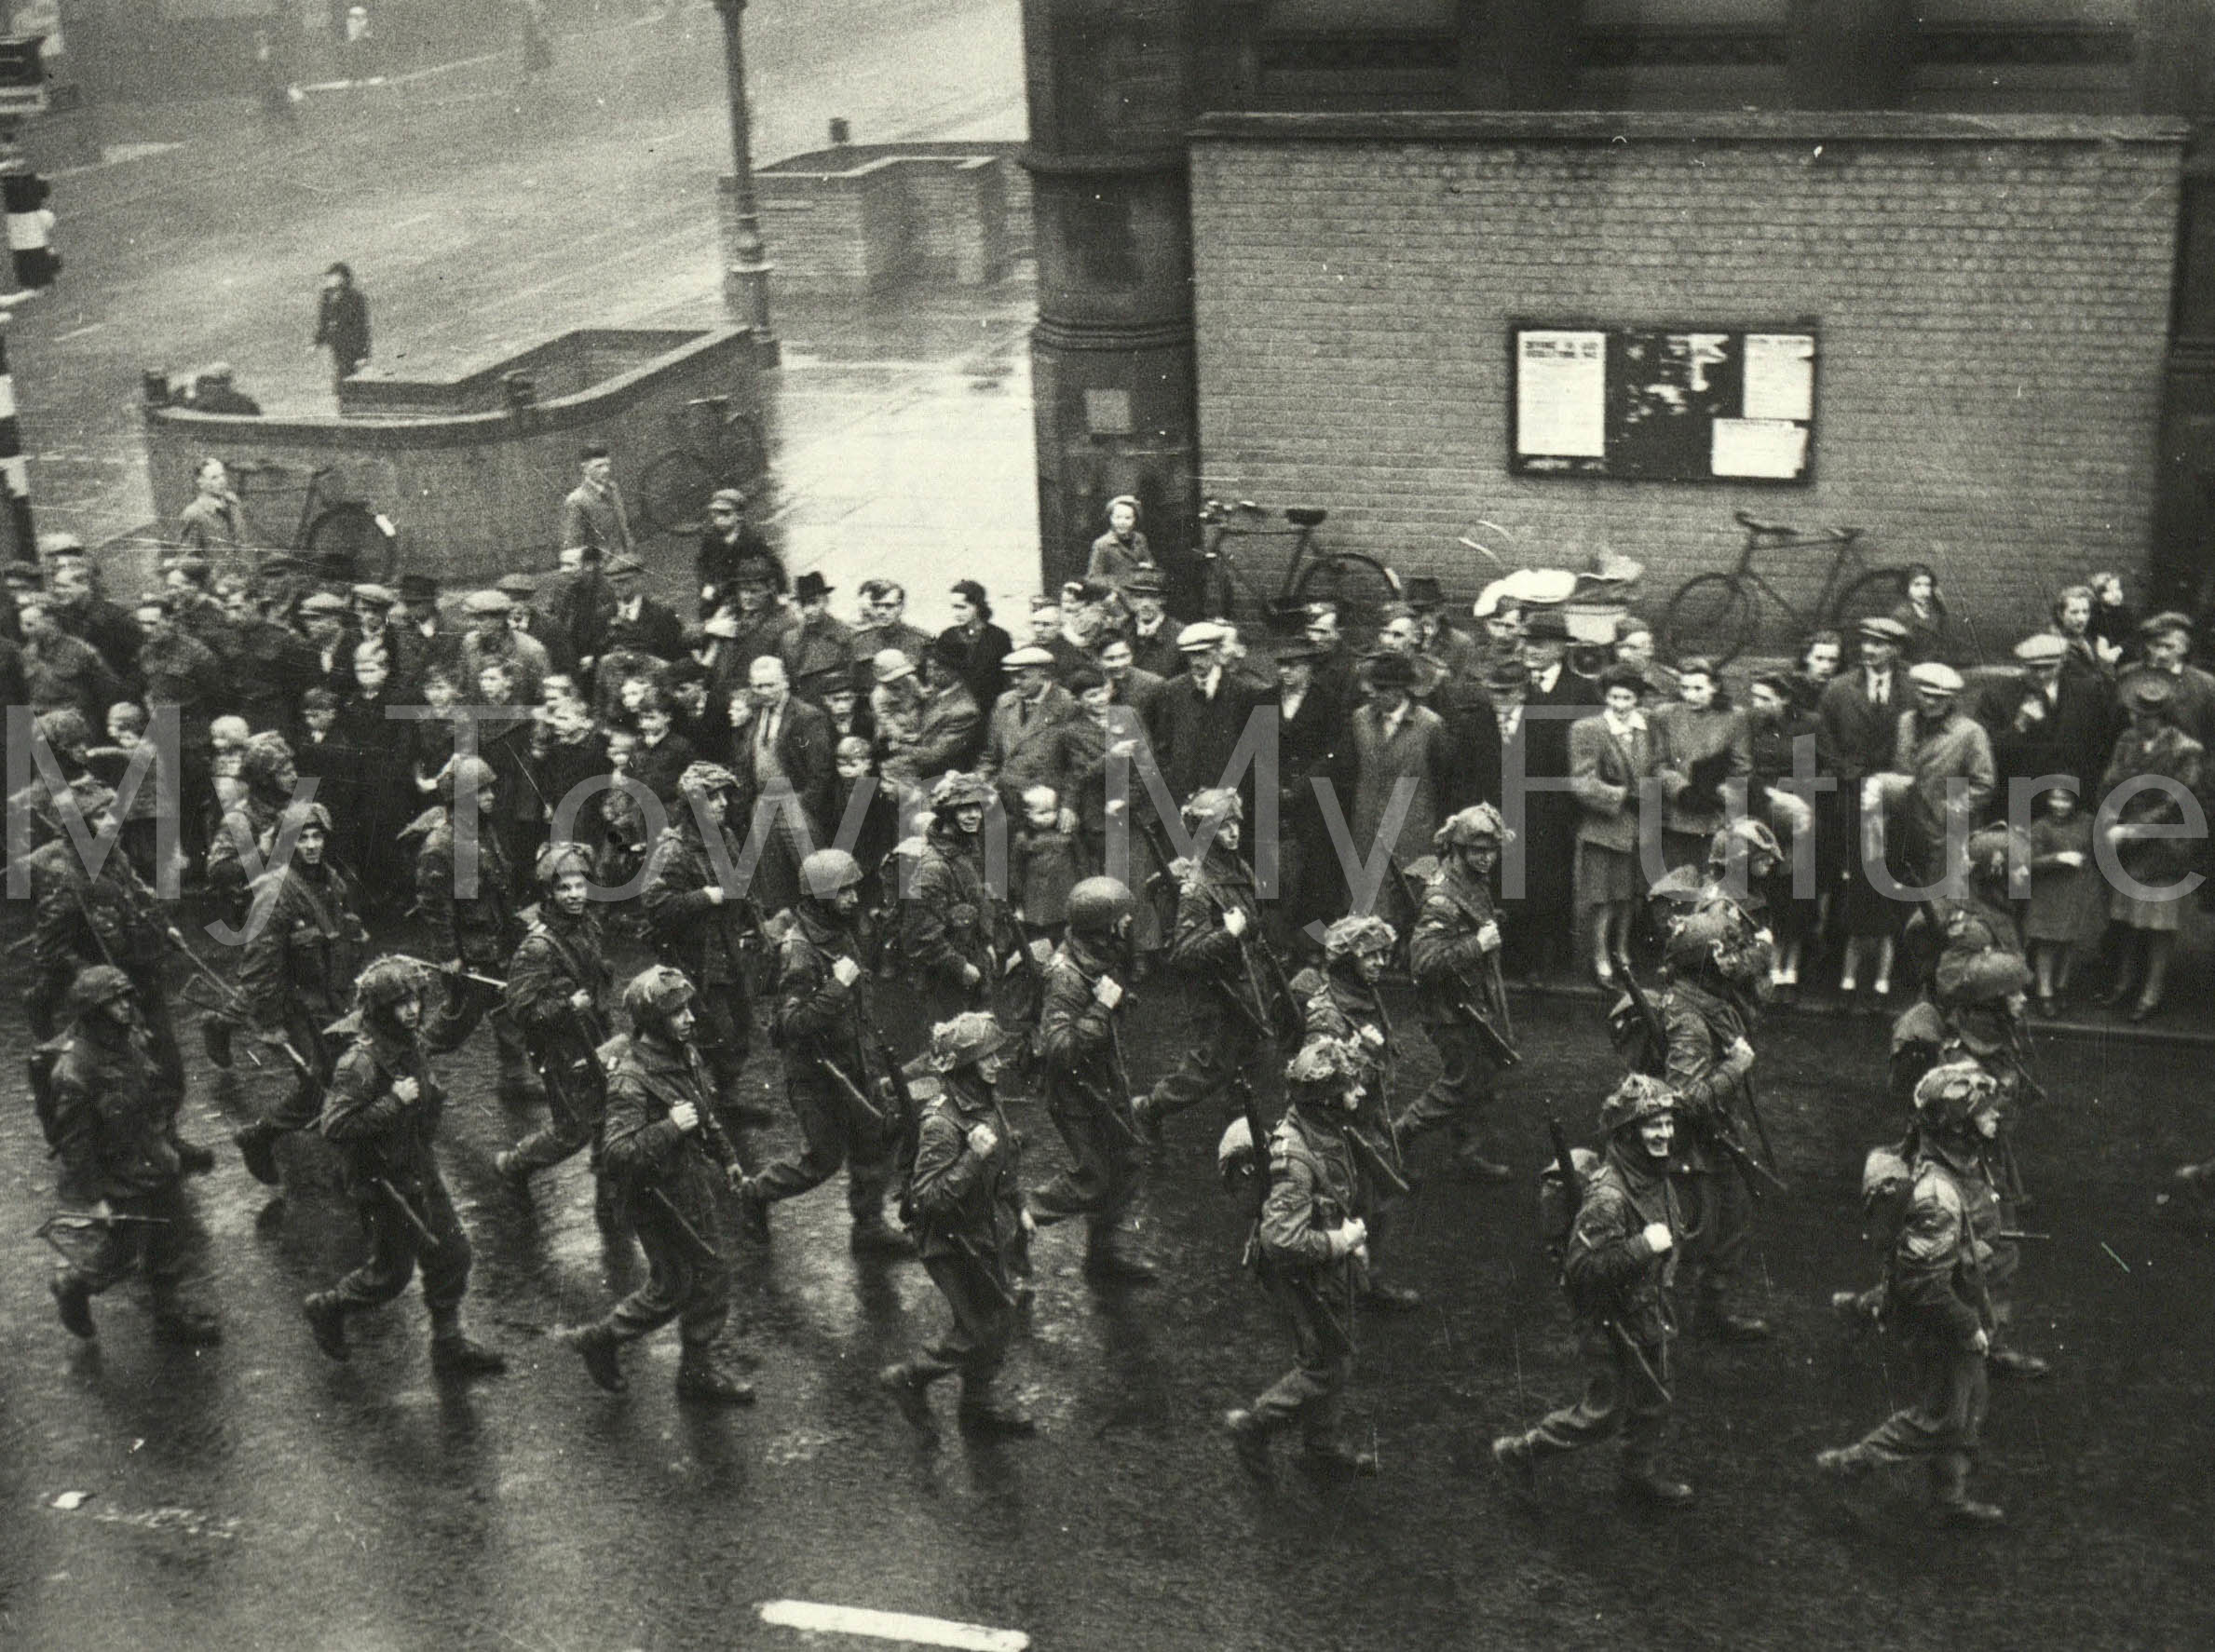 Military Personnel Home Guard and Airbourne Troops March 25th October 1943 After Battle Exercises Middlesbrough Area